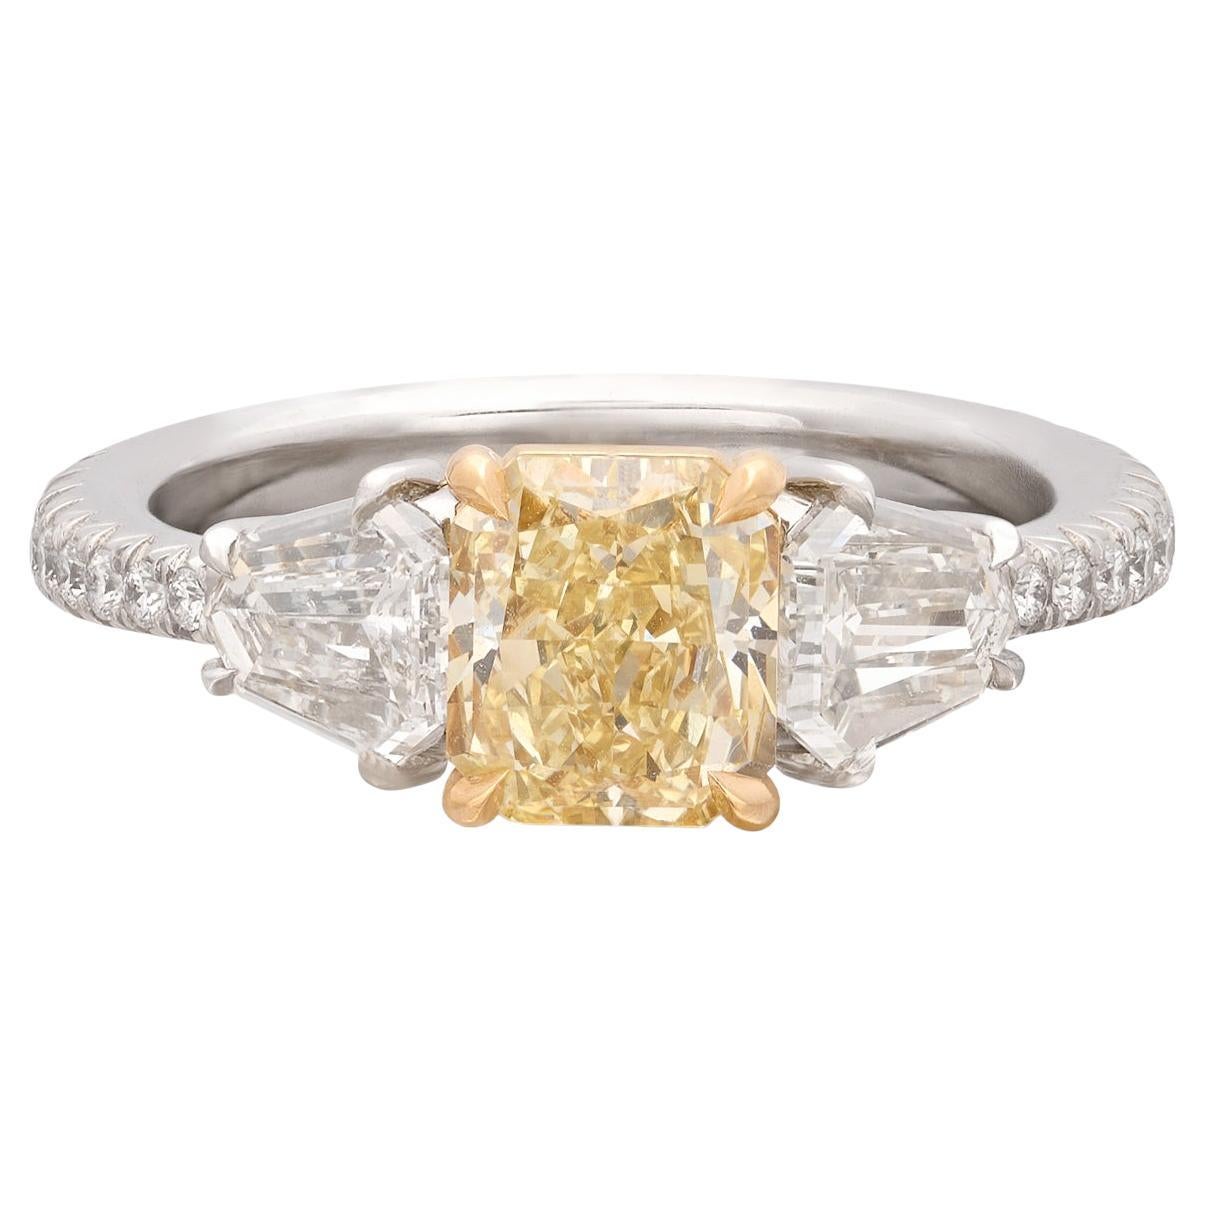 Exceptional Radiant Cut Yellow Diamond Ring For Sale